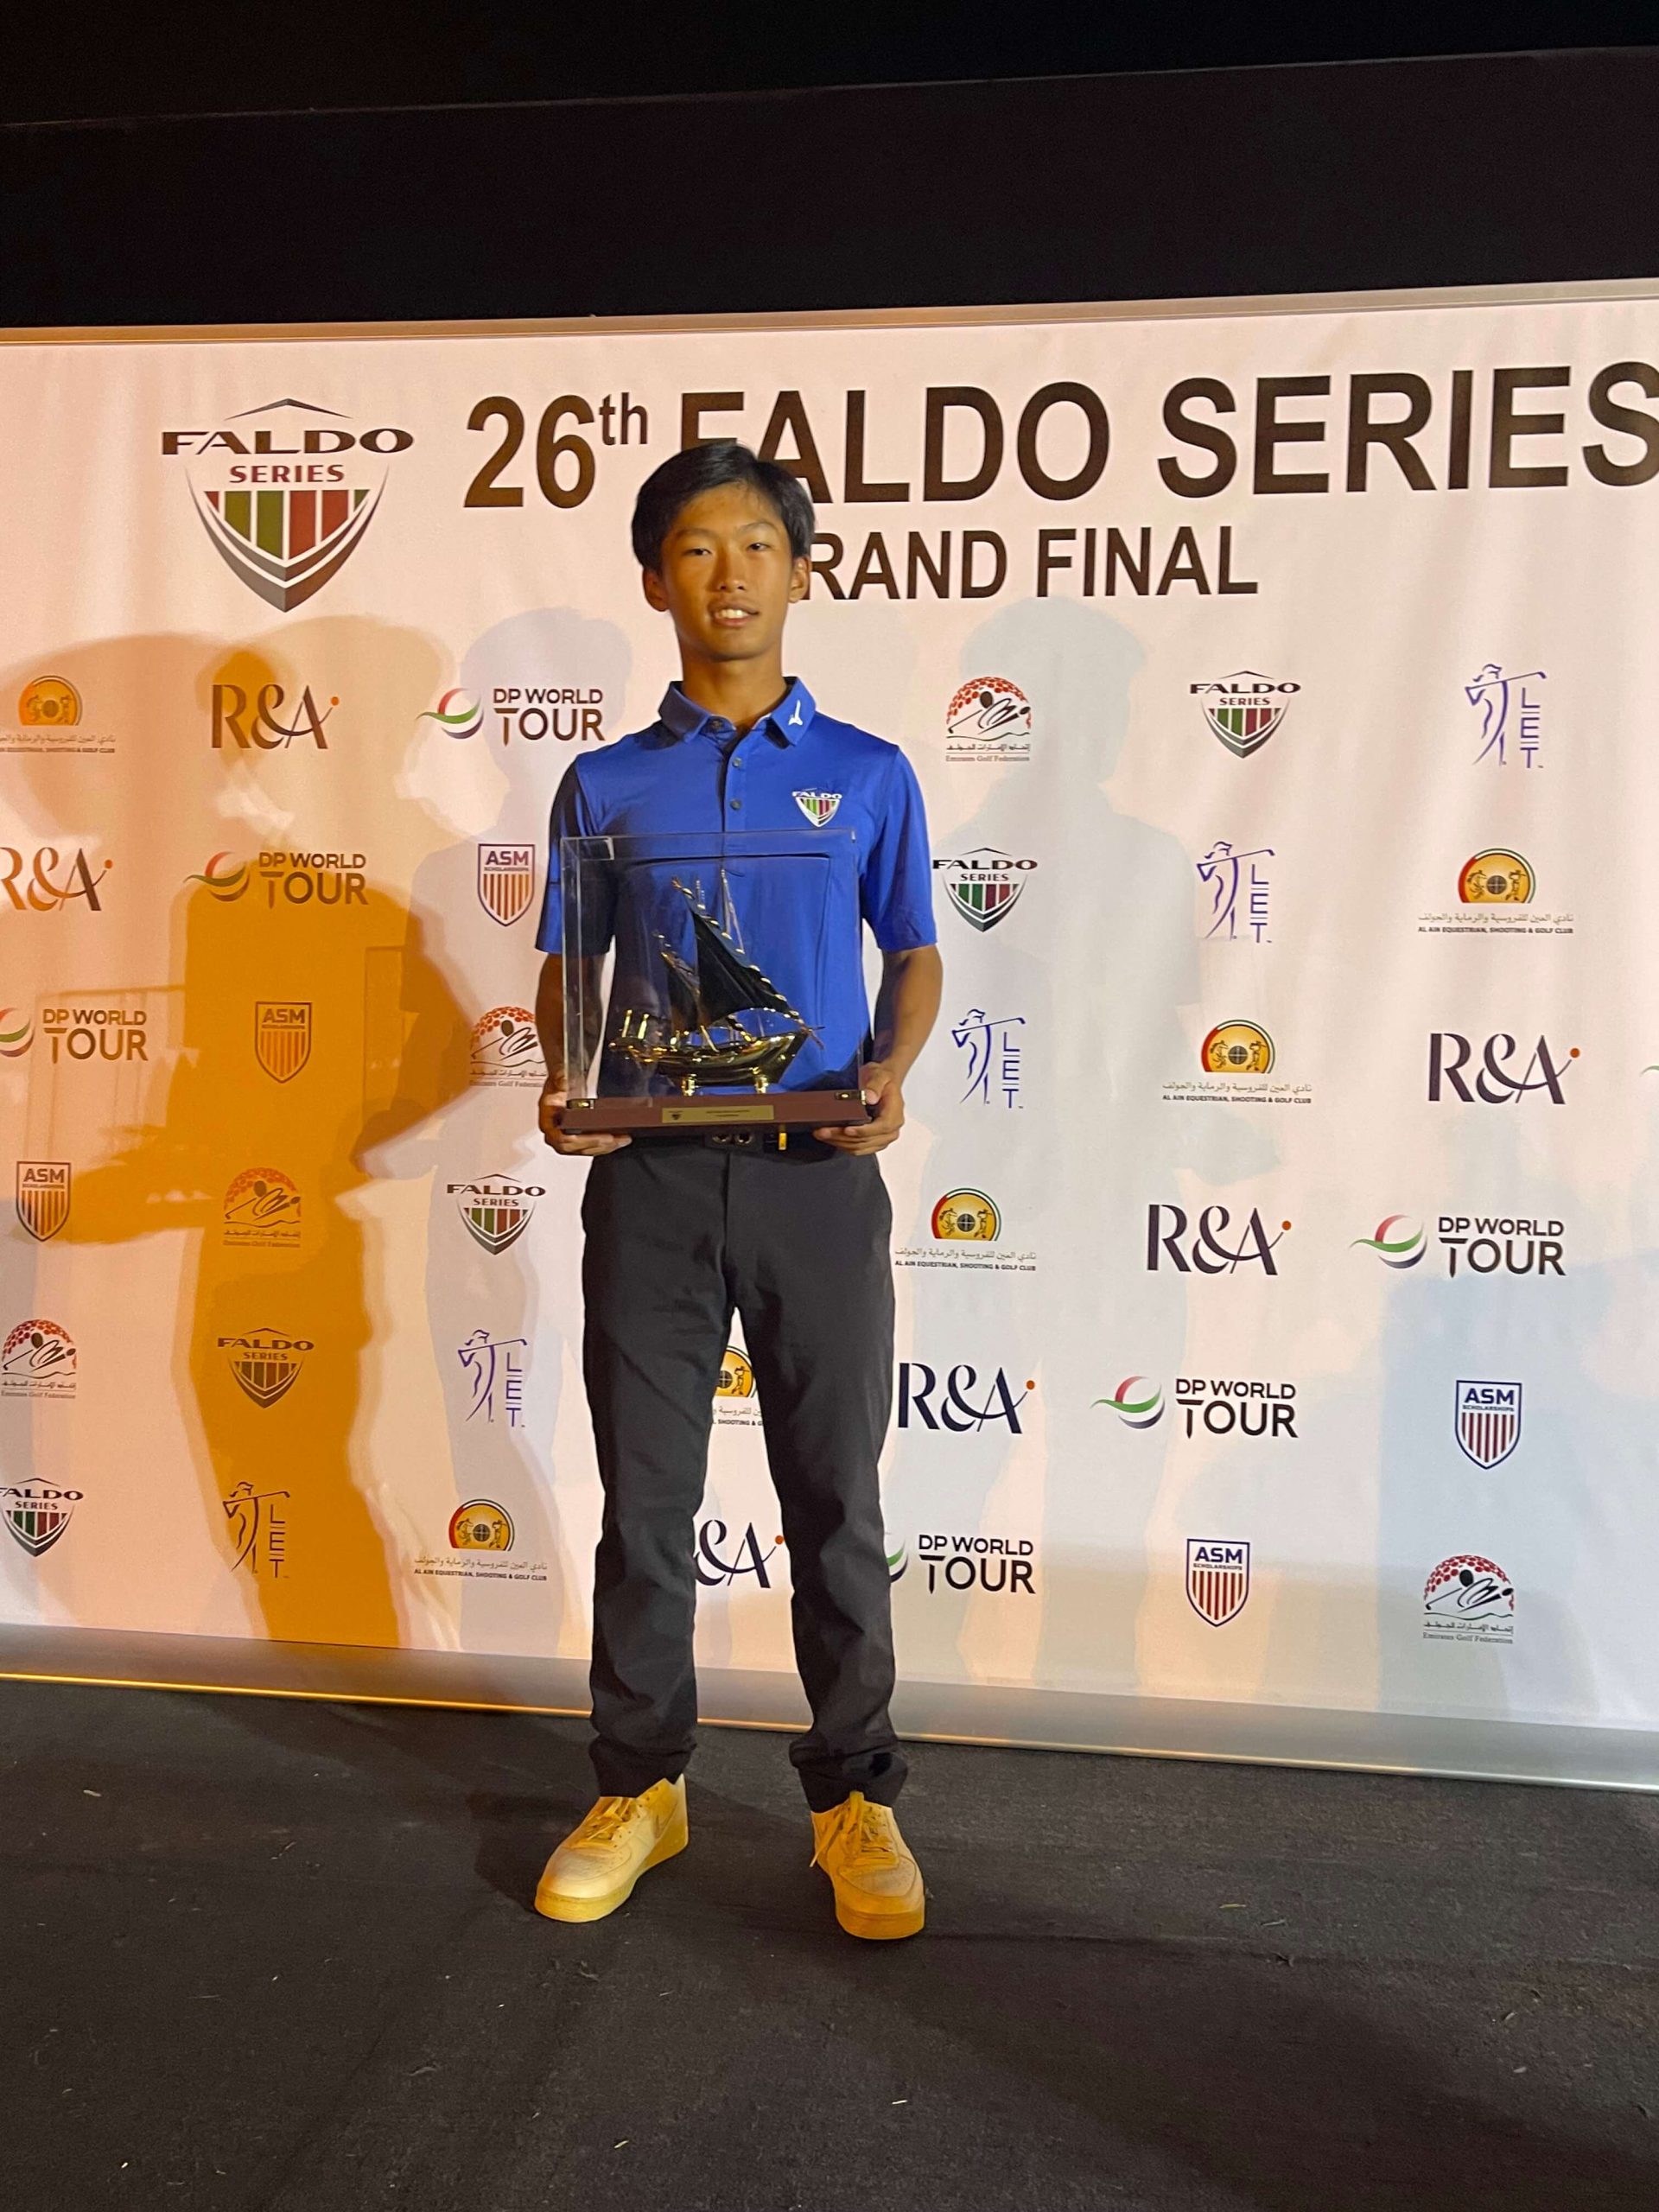 A male golf student stands in front of signage from the Faldo Series Grand Finale. In his hands he is holding a trophy in the shape of a sailboat.